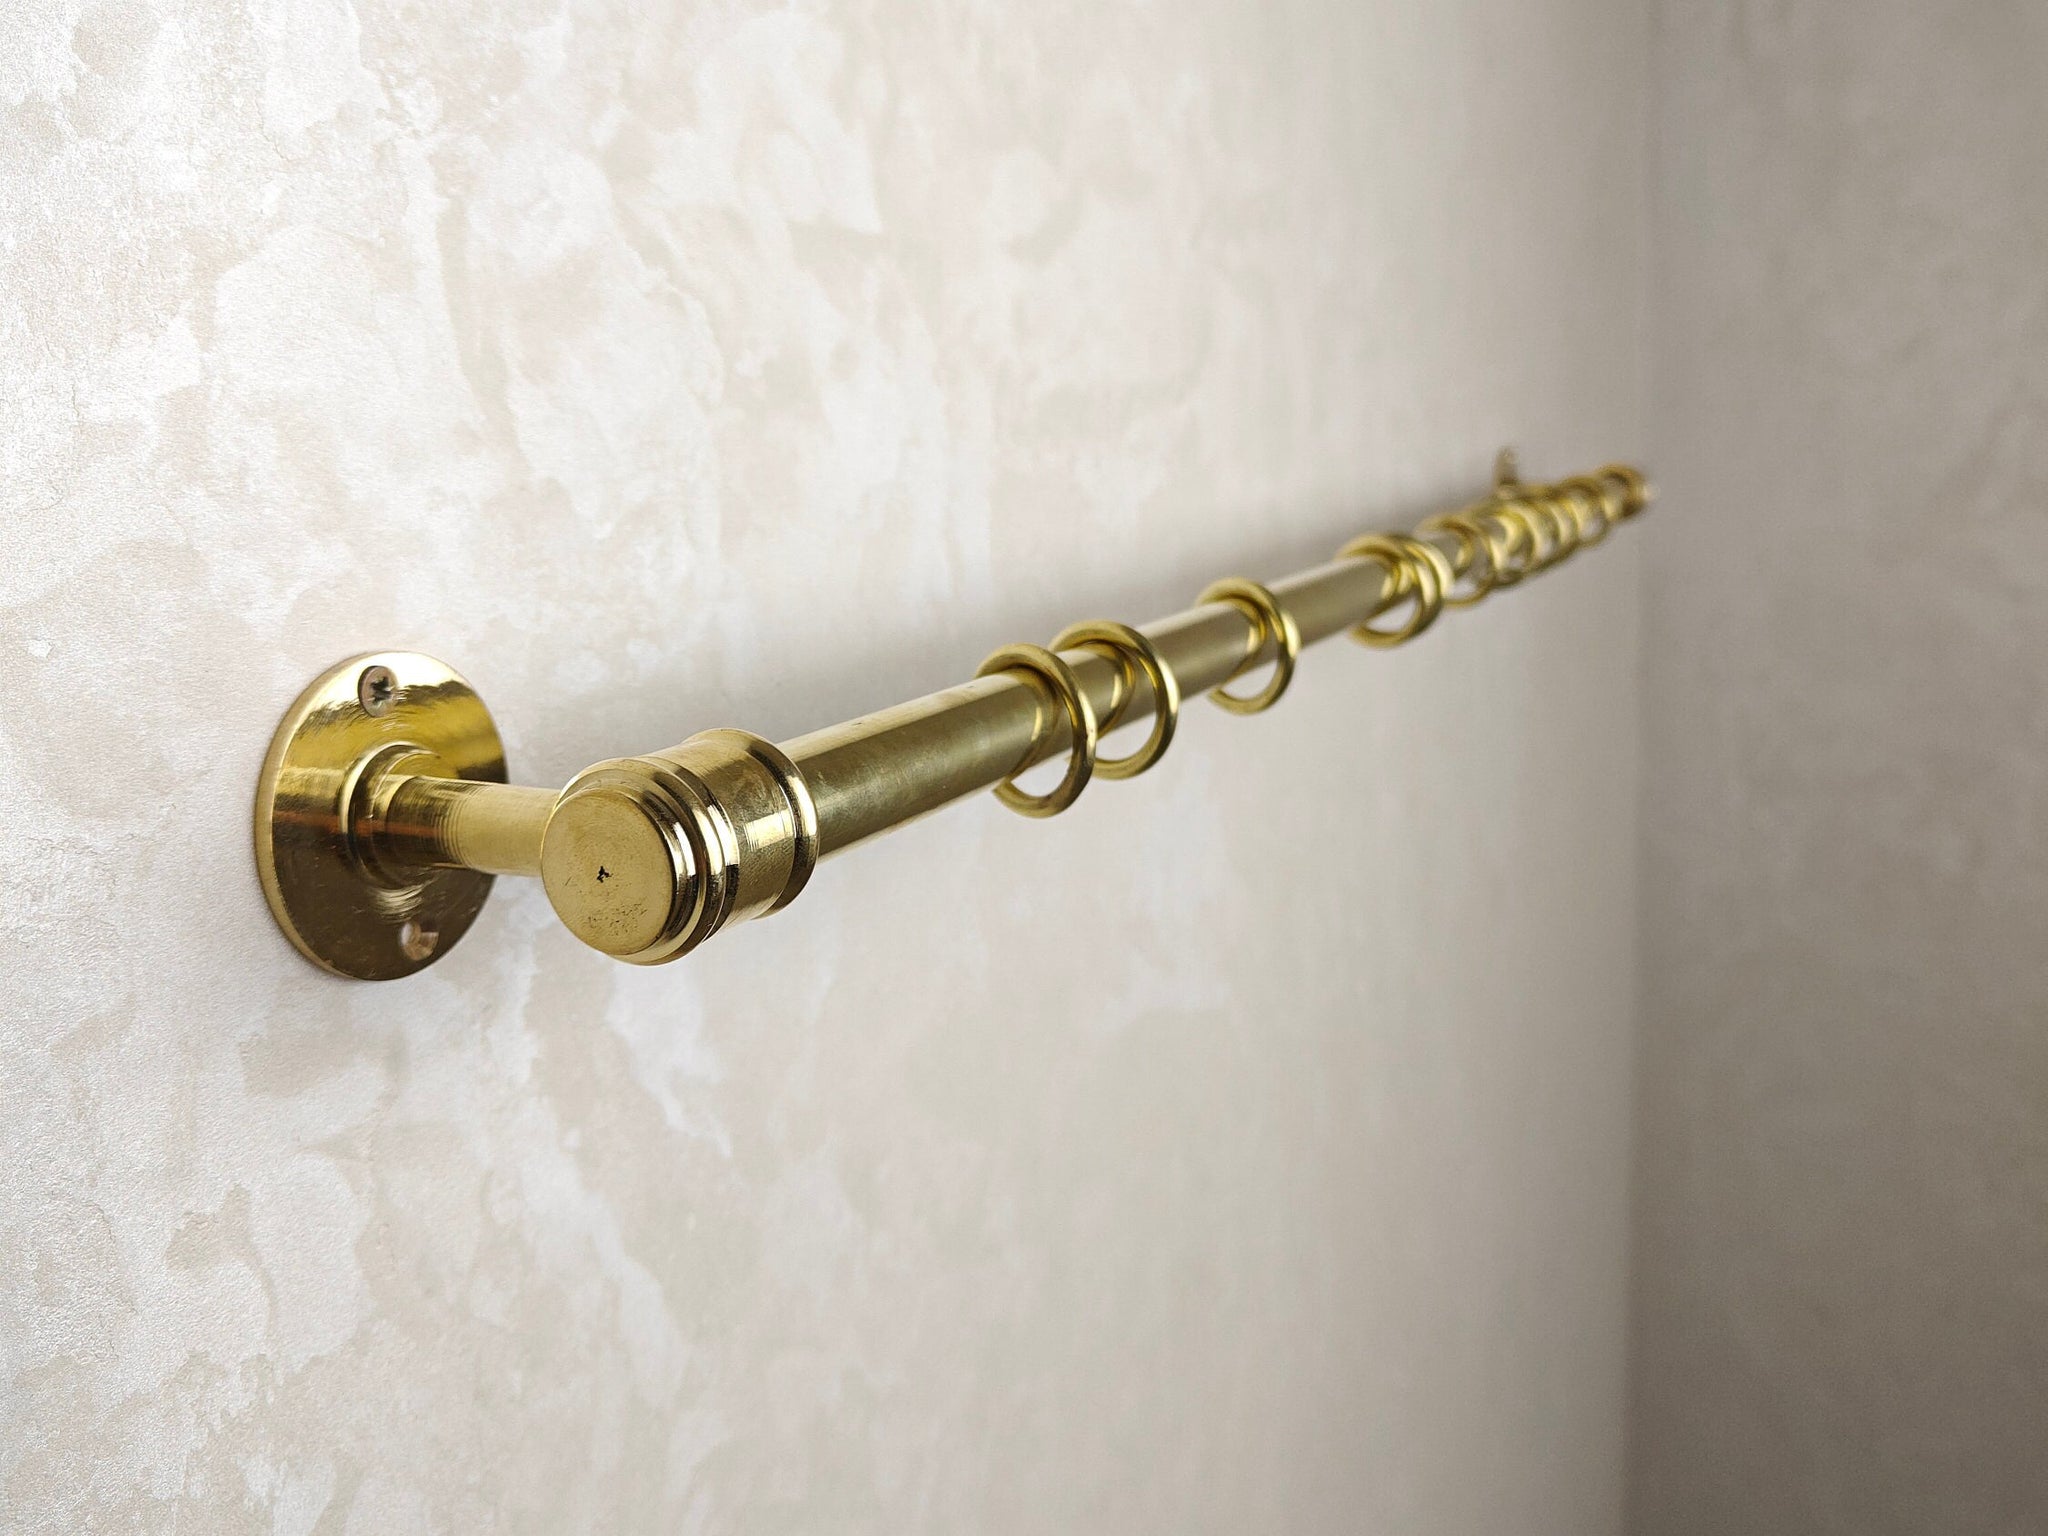 Unlacquered Brass Curtain Rod With Curtain Rings - Brass Curtain Rail - Curtain Hardware